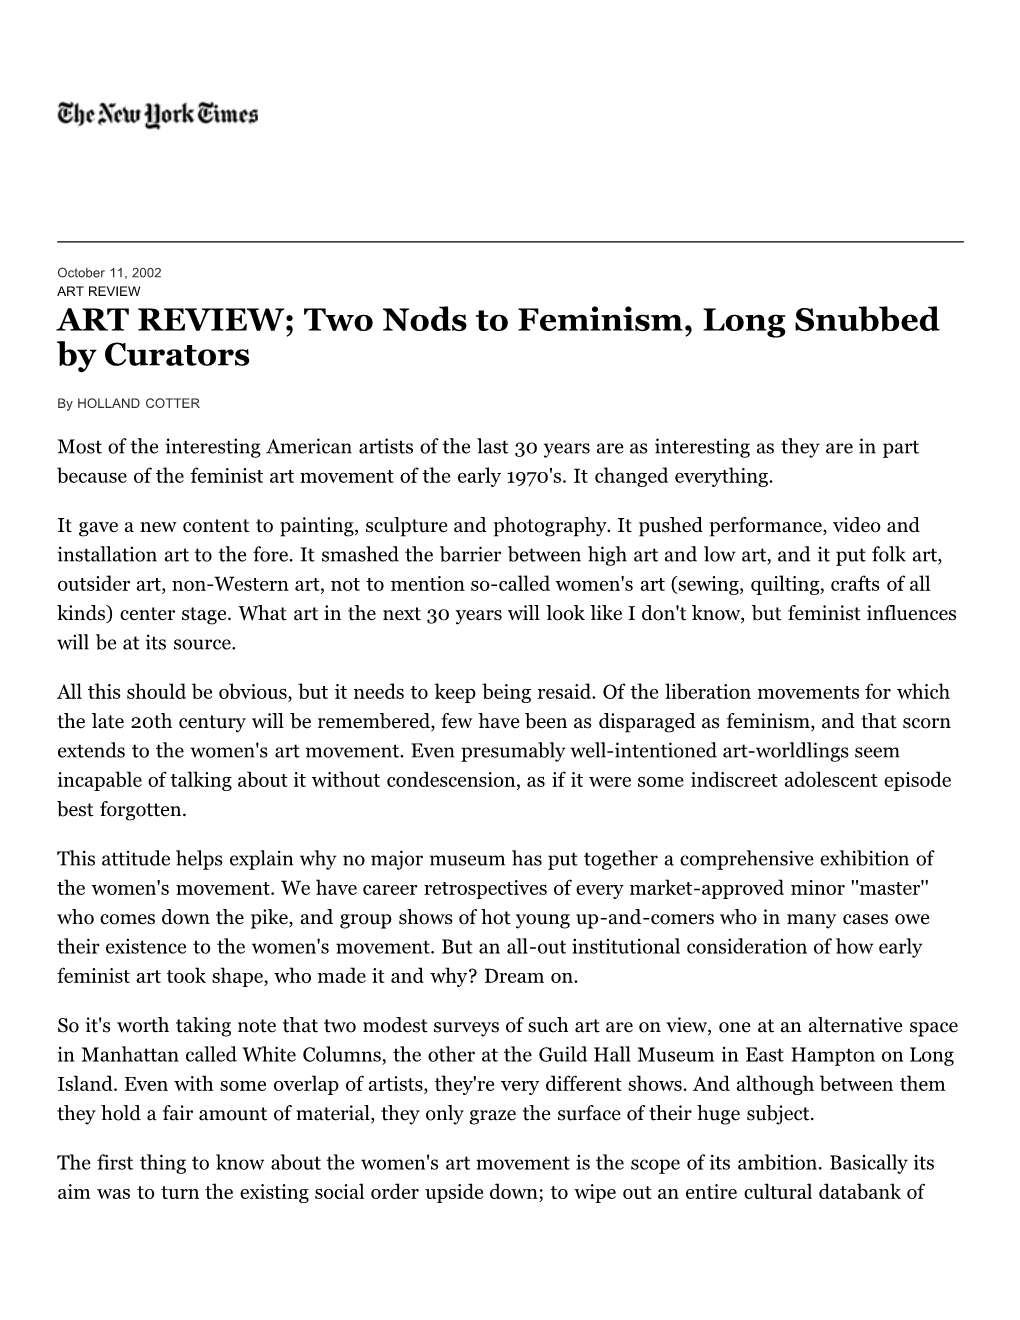 ART REVIEW; Two Nods to Feminism, Long Snubbed by Curators